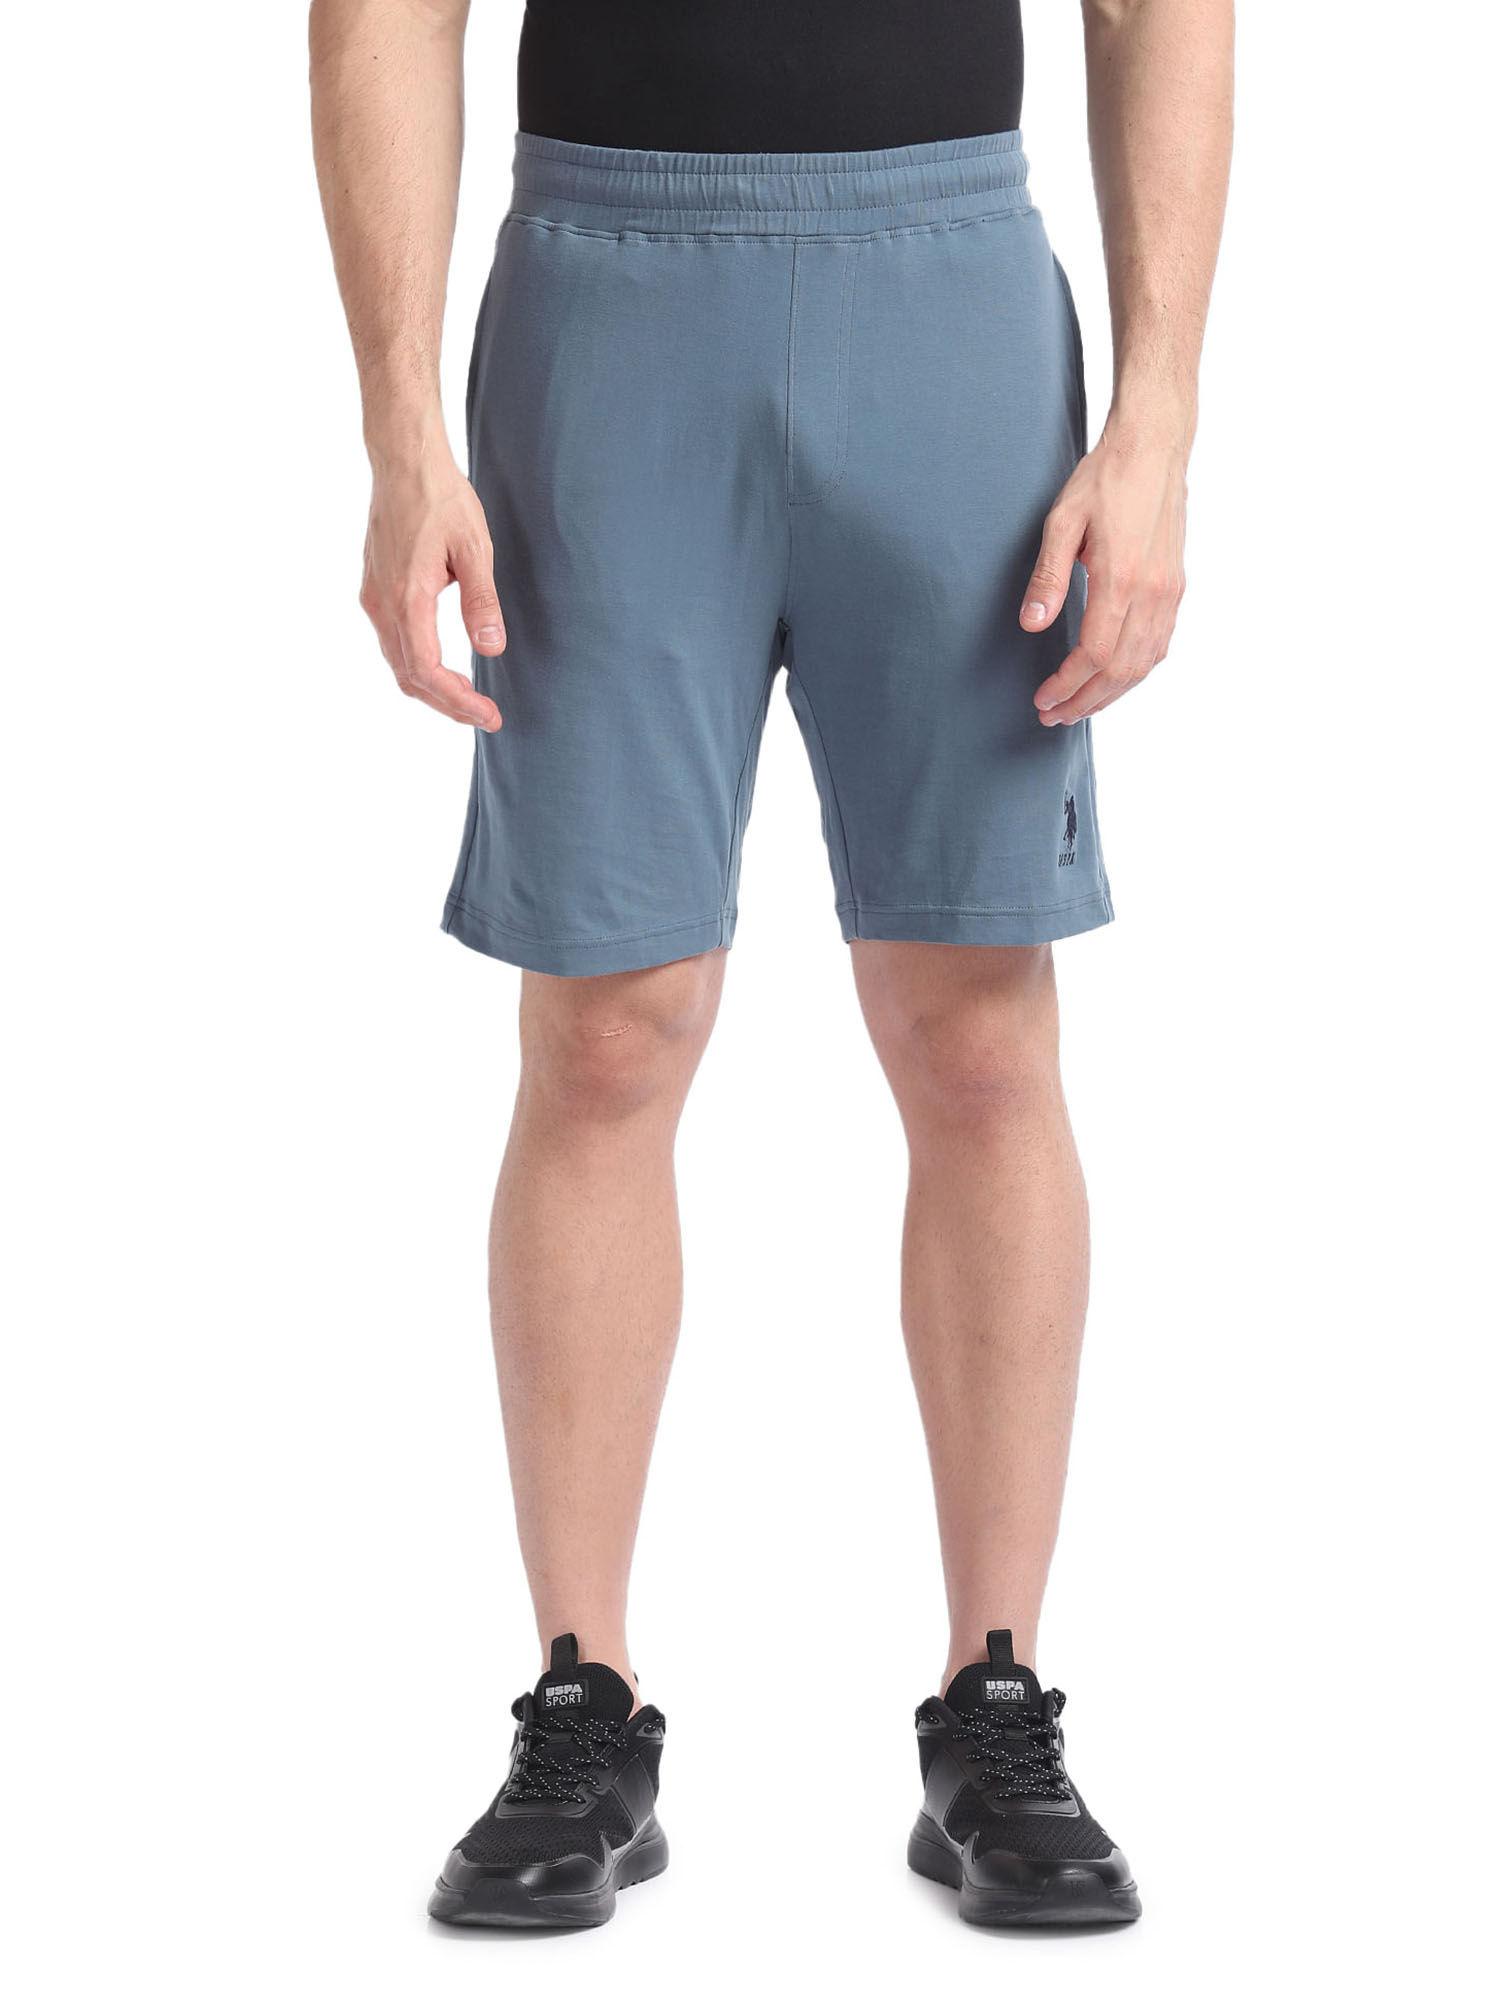 cotton-stretch-oes01-lounge-shorts